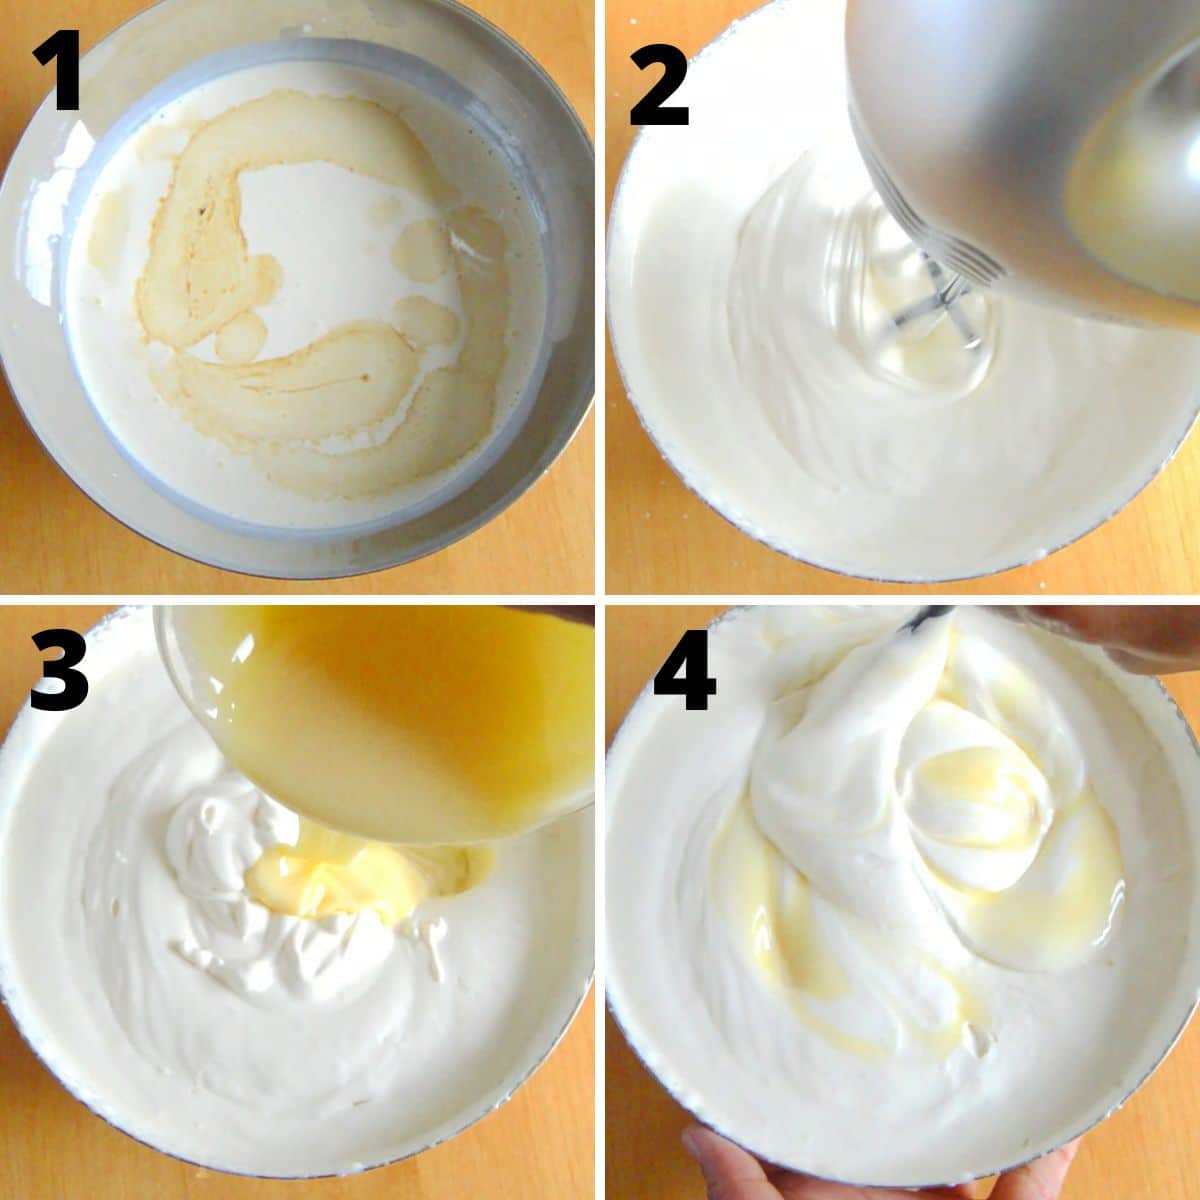 college of 4 images of a steel container containing cream, whipping cream and vanilla extract, pouring condensed milk and folding it with whipped cream.